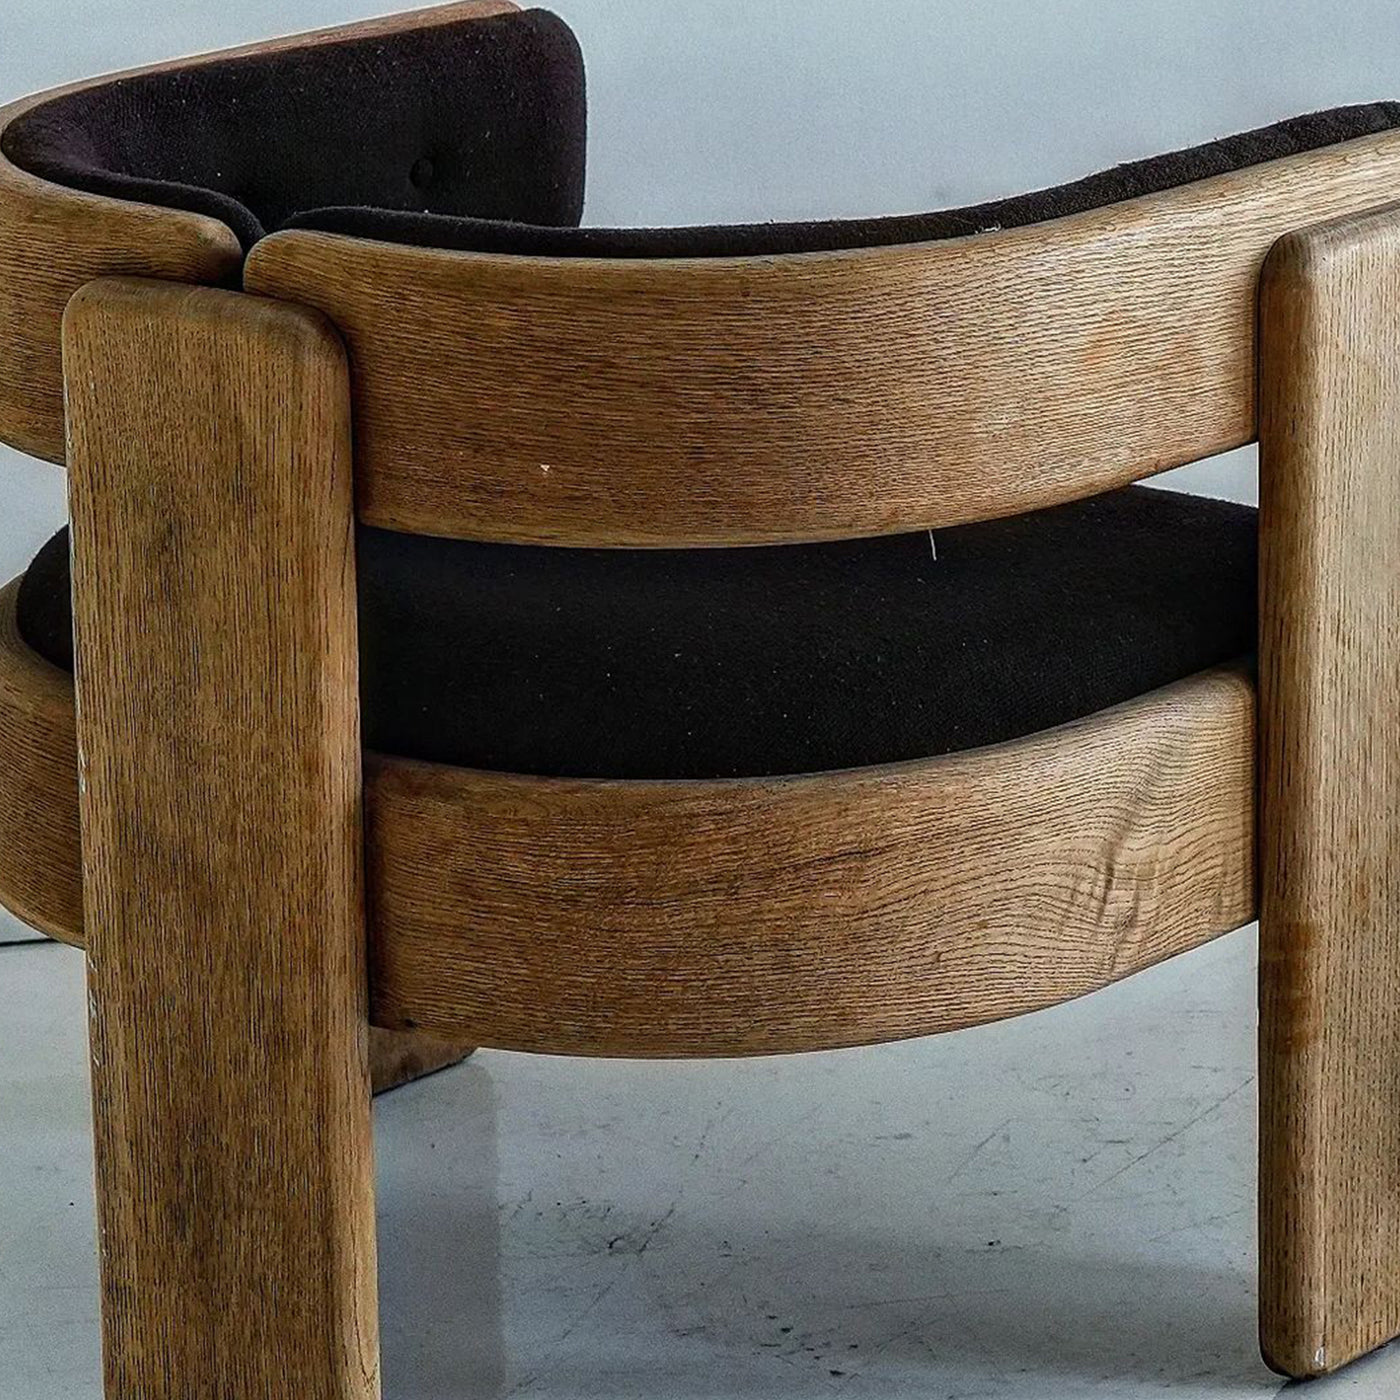 Jens Risom Rounded Wood Chairs (Pair)